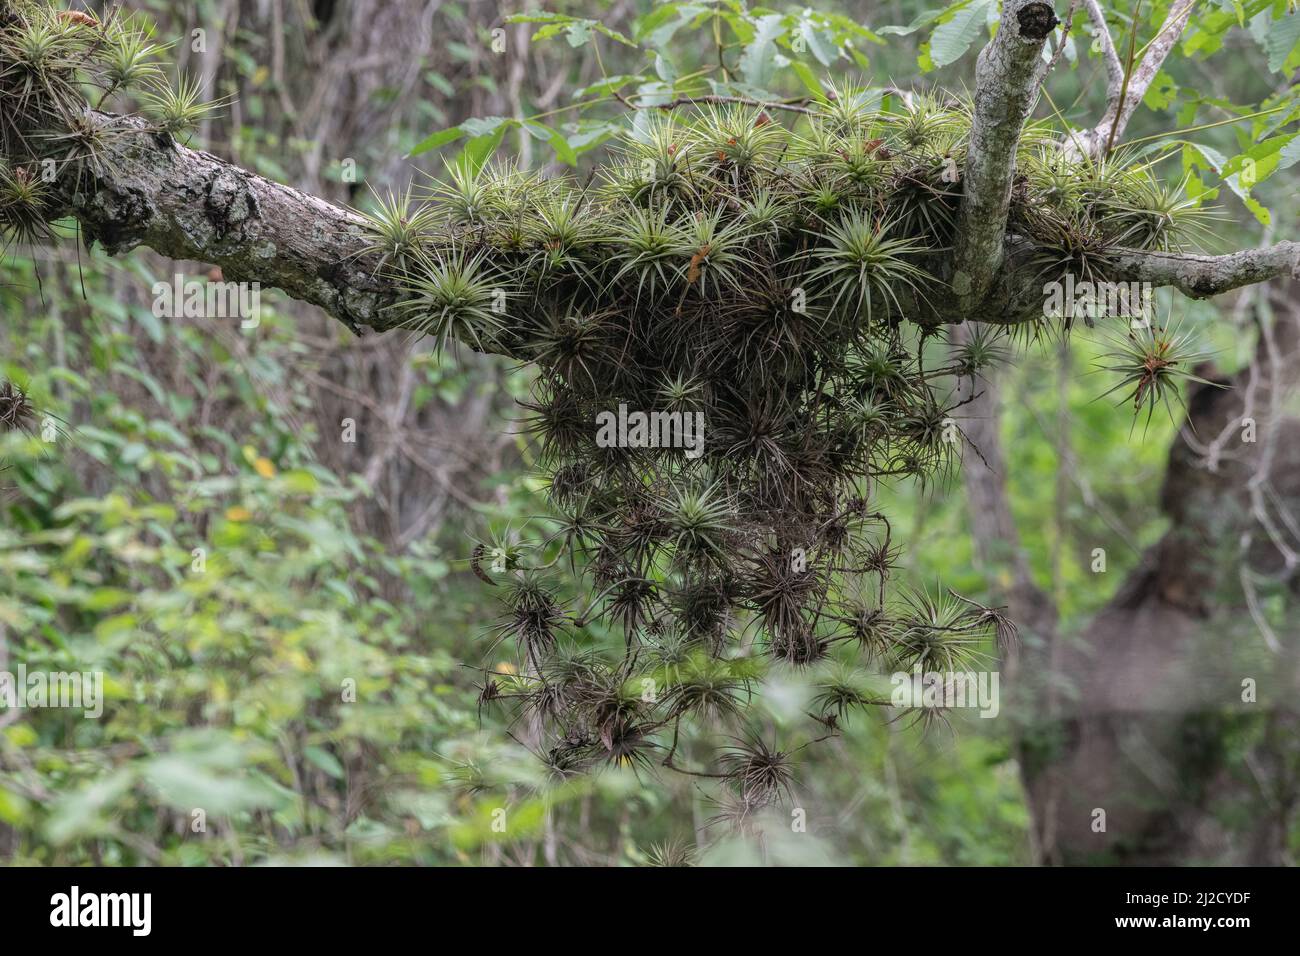 Epiphytic airplants growing on a tree branch in the tumbesian dry forest. Tillandsia espinosae, an airplant from Ecuador and Peru. Stock Photo